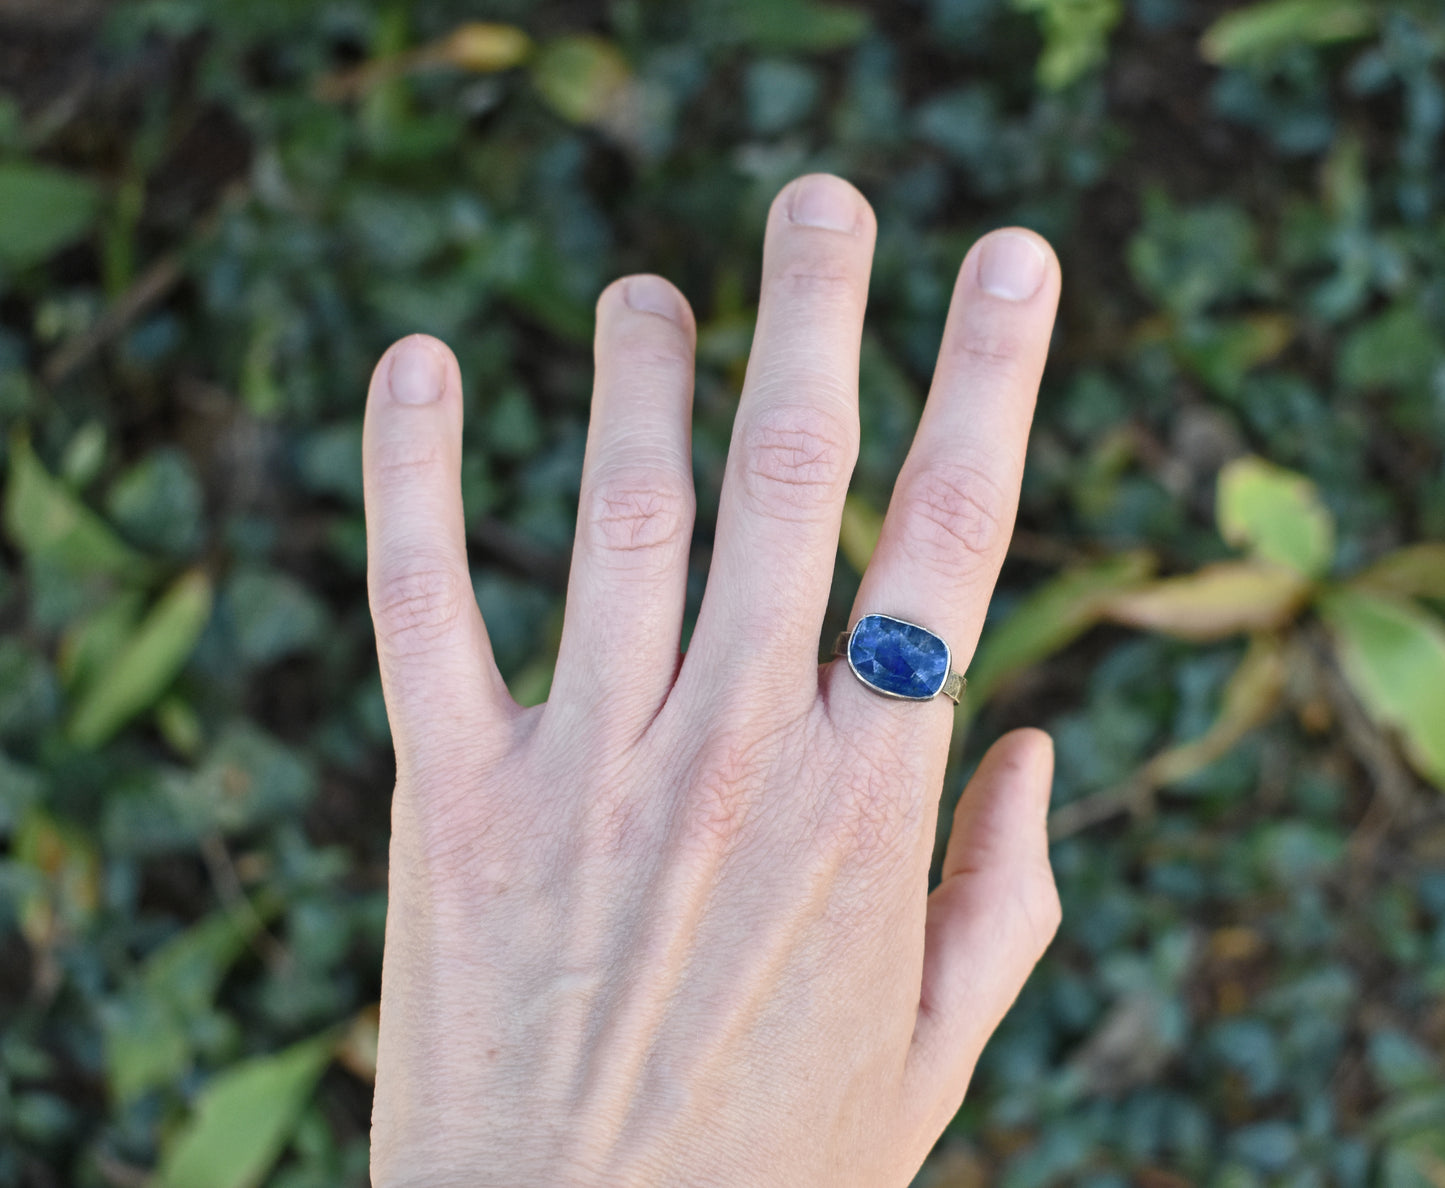 Blue Sapphire and Sterling Silver Ring, Size 7, Faceted Gemstone Metalsmith Jewelry